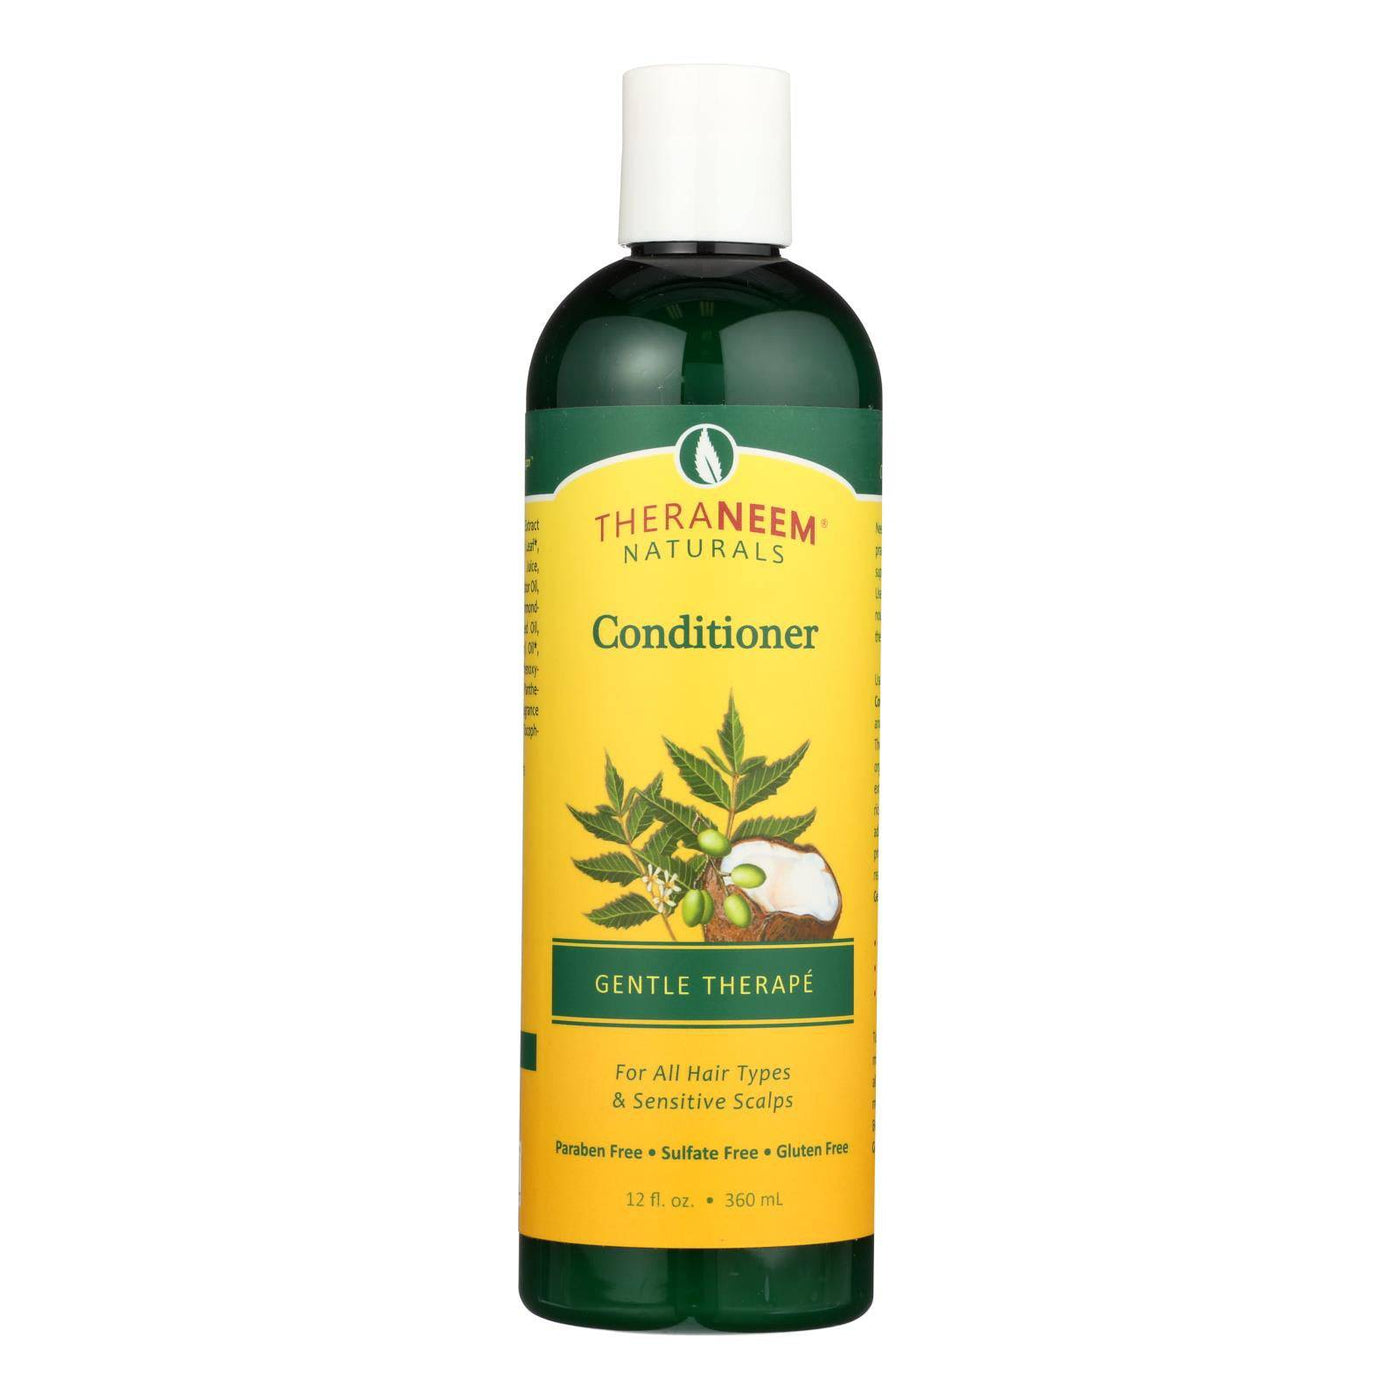 Buy Theraneem Naturals Conditioner - Gentle Therapy - 12 Fl Oz  at OnlyNaturals.us